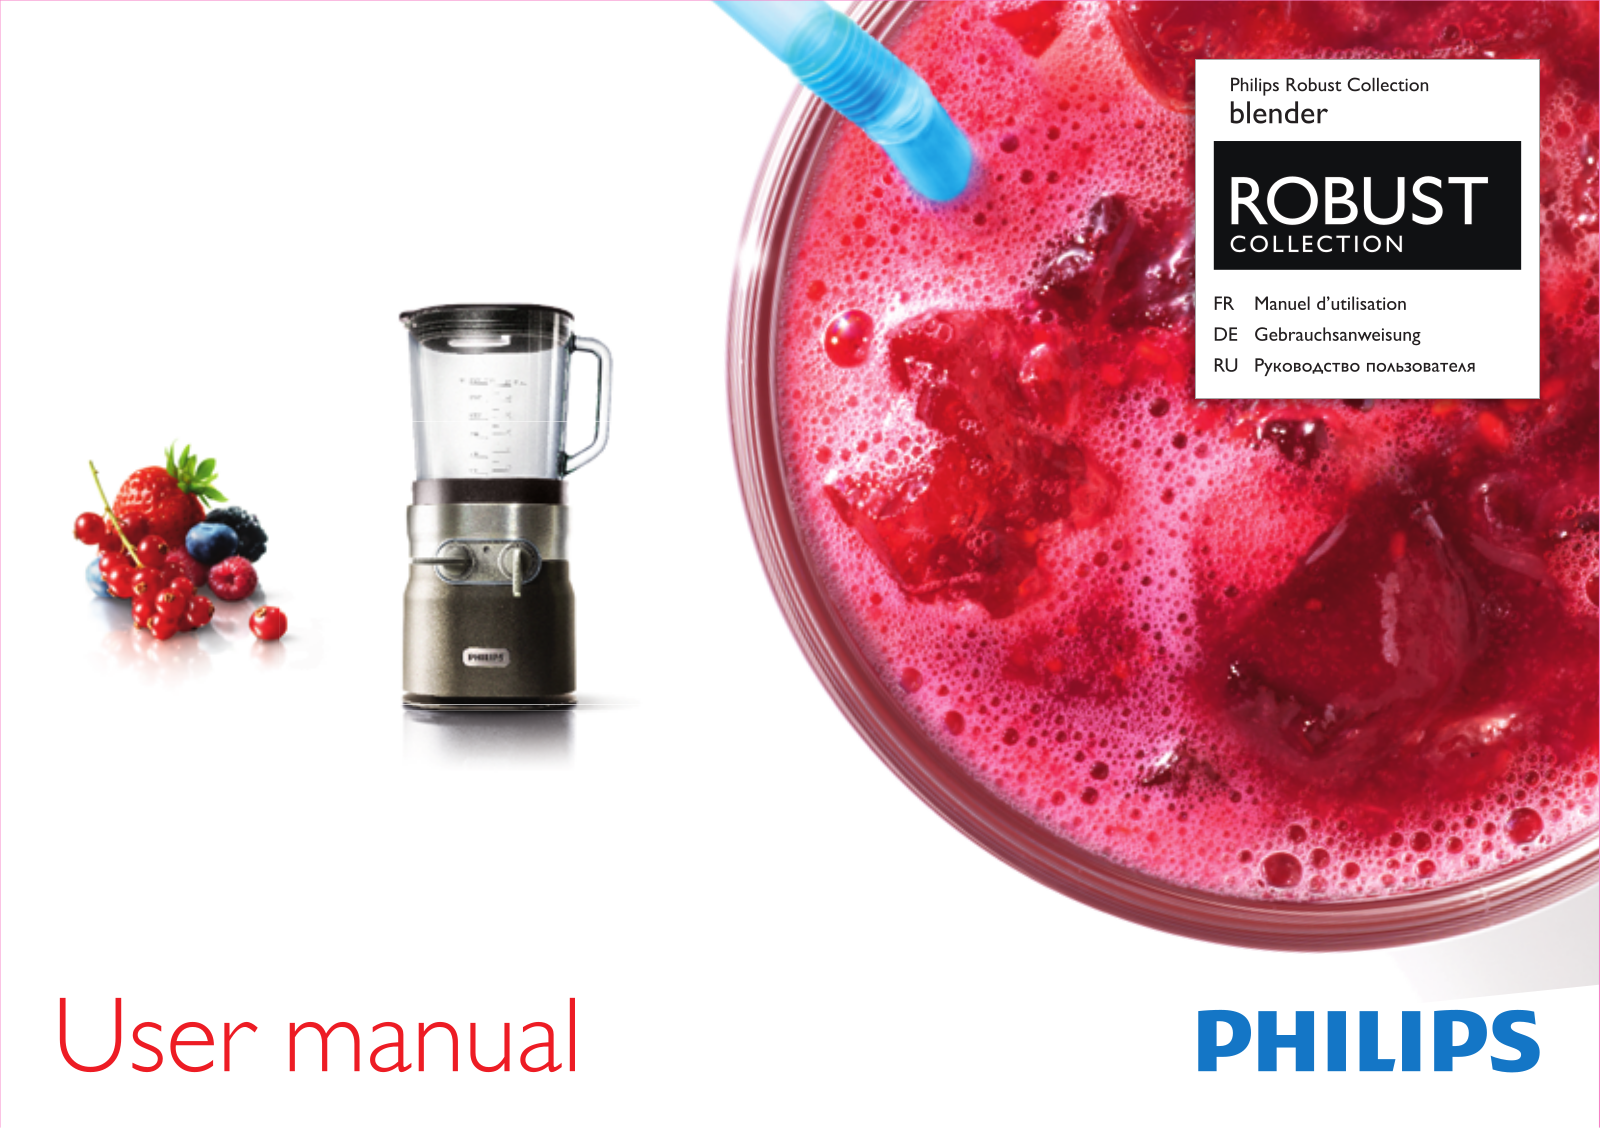 Philips Robust Collection Blender User Manual